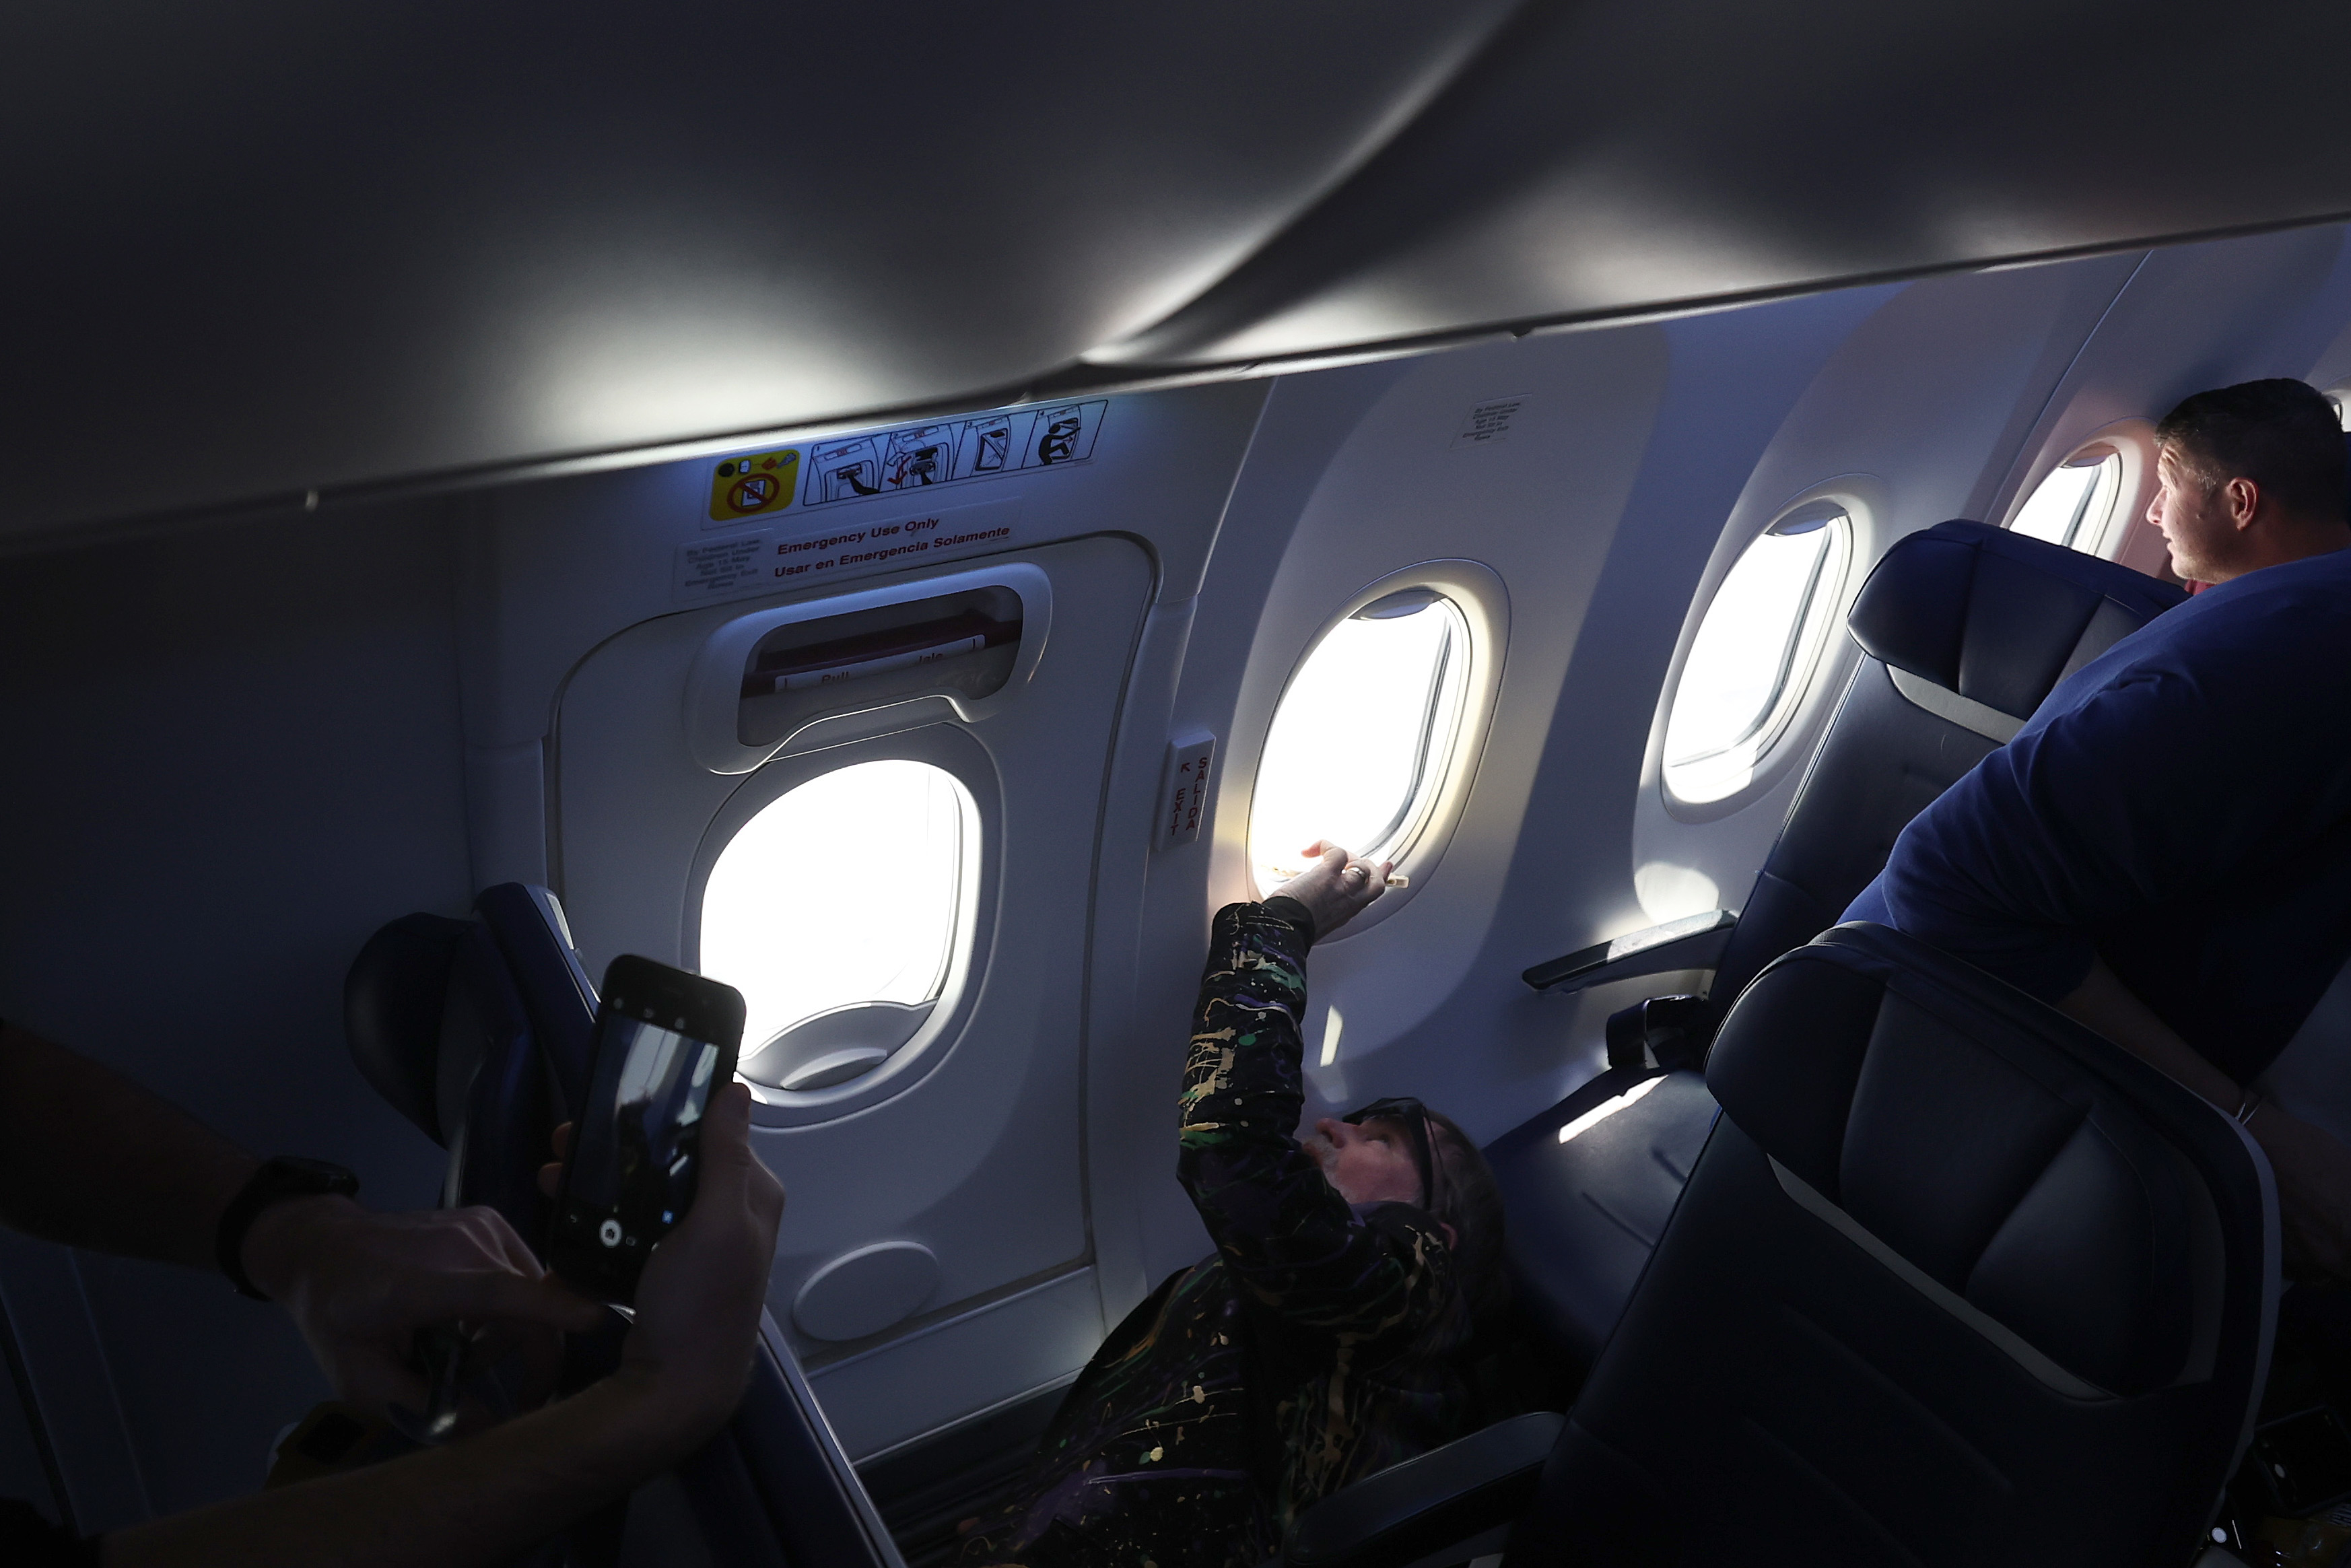 Passengers on a plane with one person pulling down a window shade; others record the event with phones